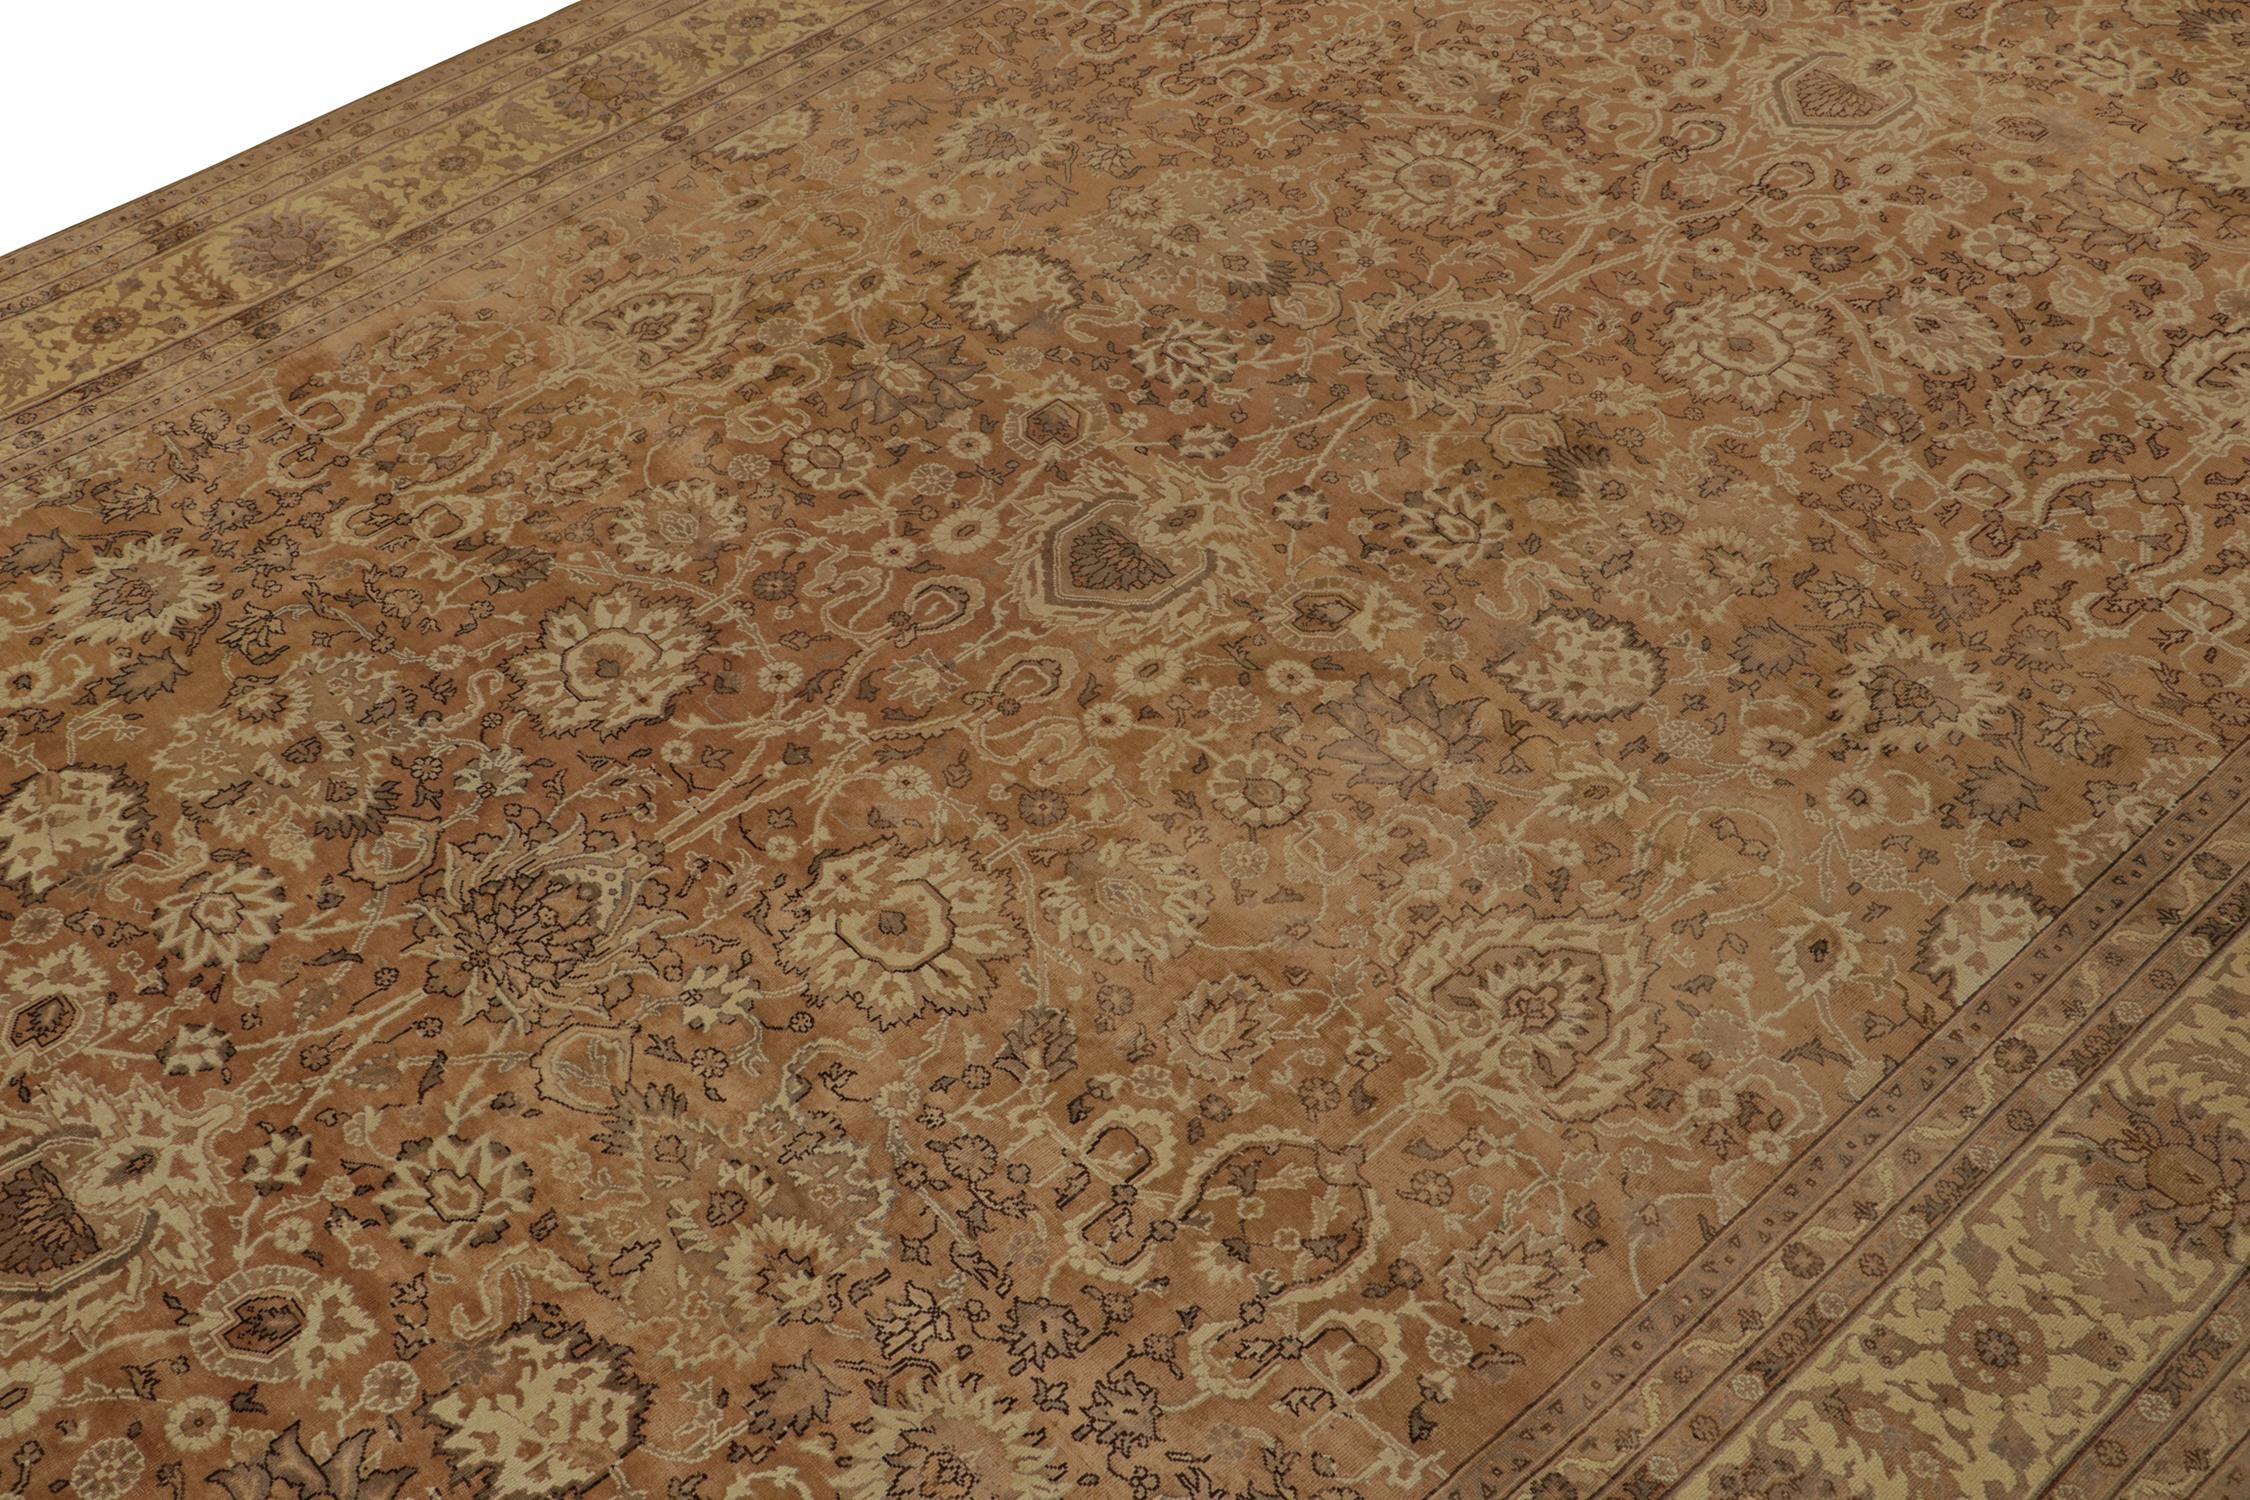 Hand-Knotted Antique Persian Rug in Beige-Brown and Gold Floral Patterns by Rug & Kilim For Sale